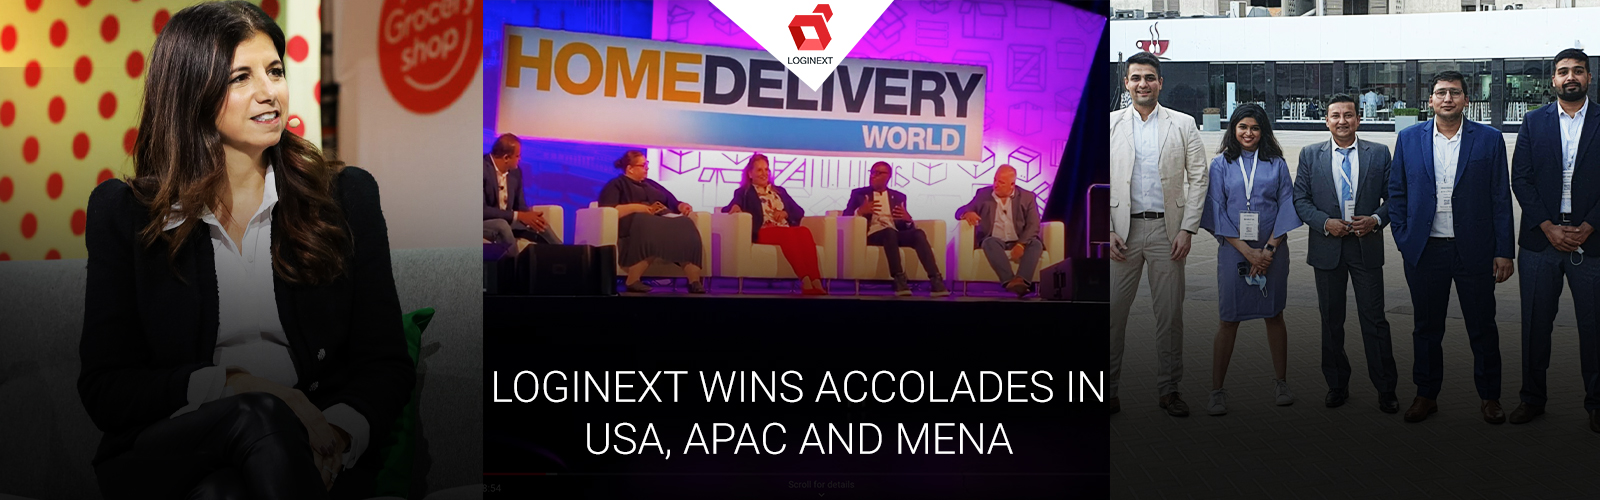 Events Galore! LogiNext wins accolades in USA, APAC and MENA